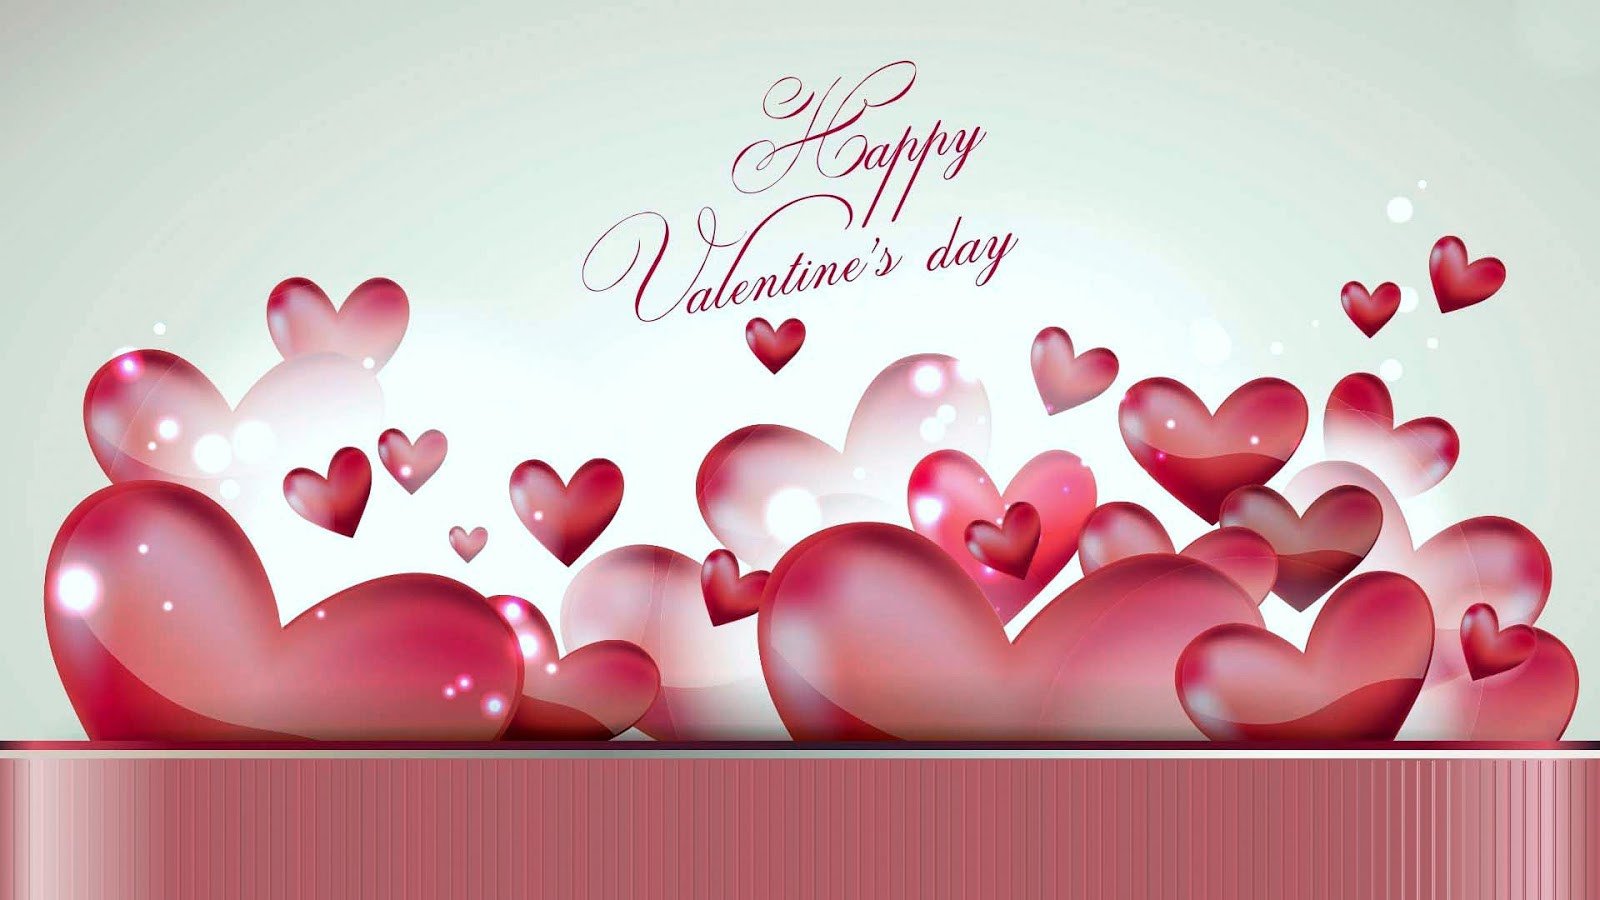 Happy Valentines Day Wallpaper 14th February Valentines Day Wishing Cards